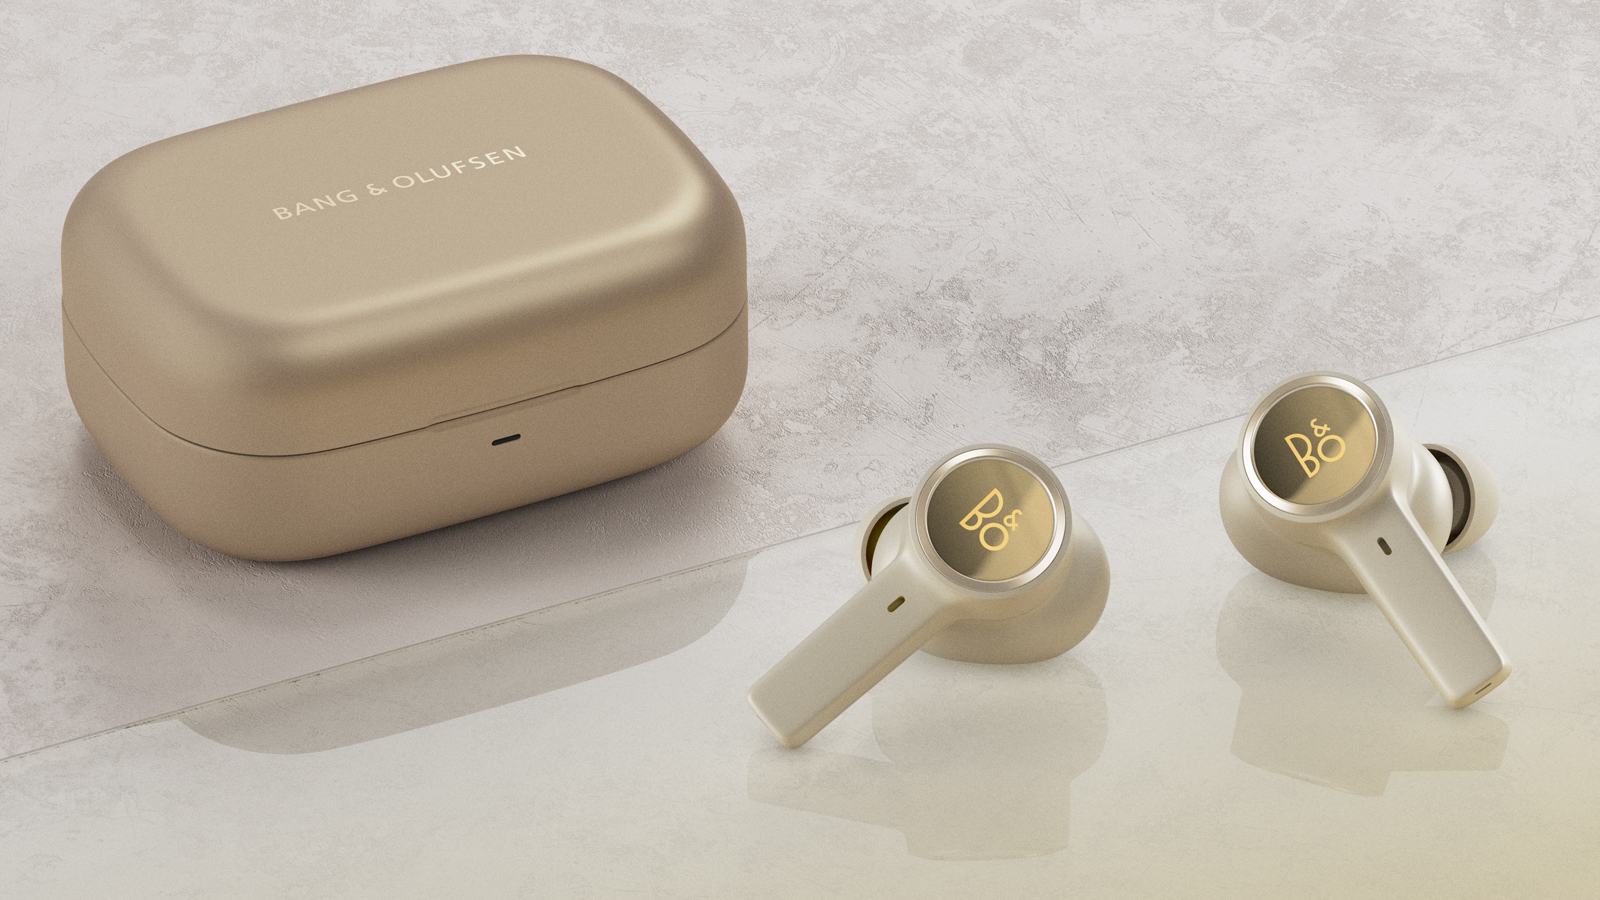 the bang & olufsen beoplay ex true wireless earbuds in gold